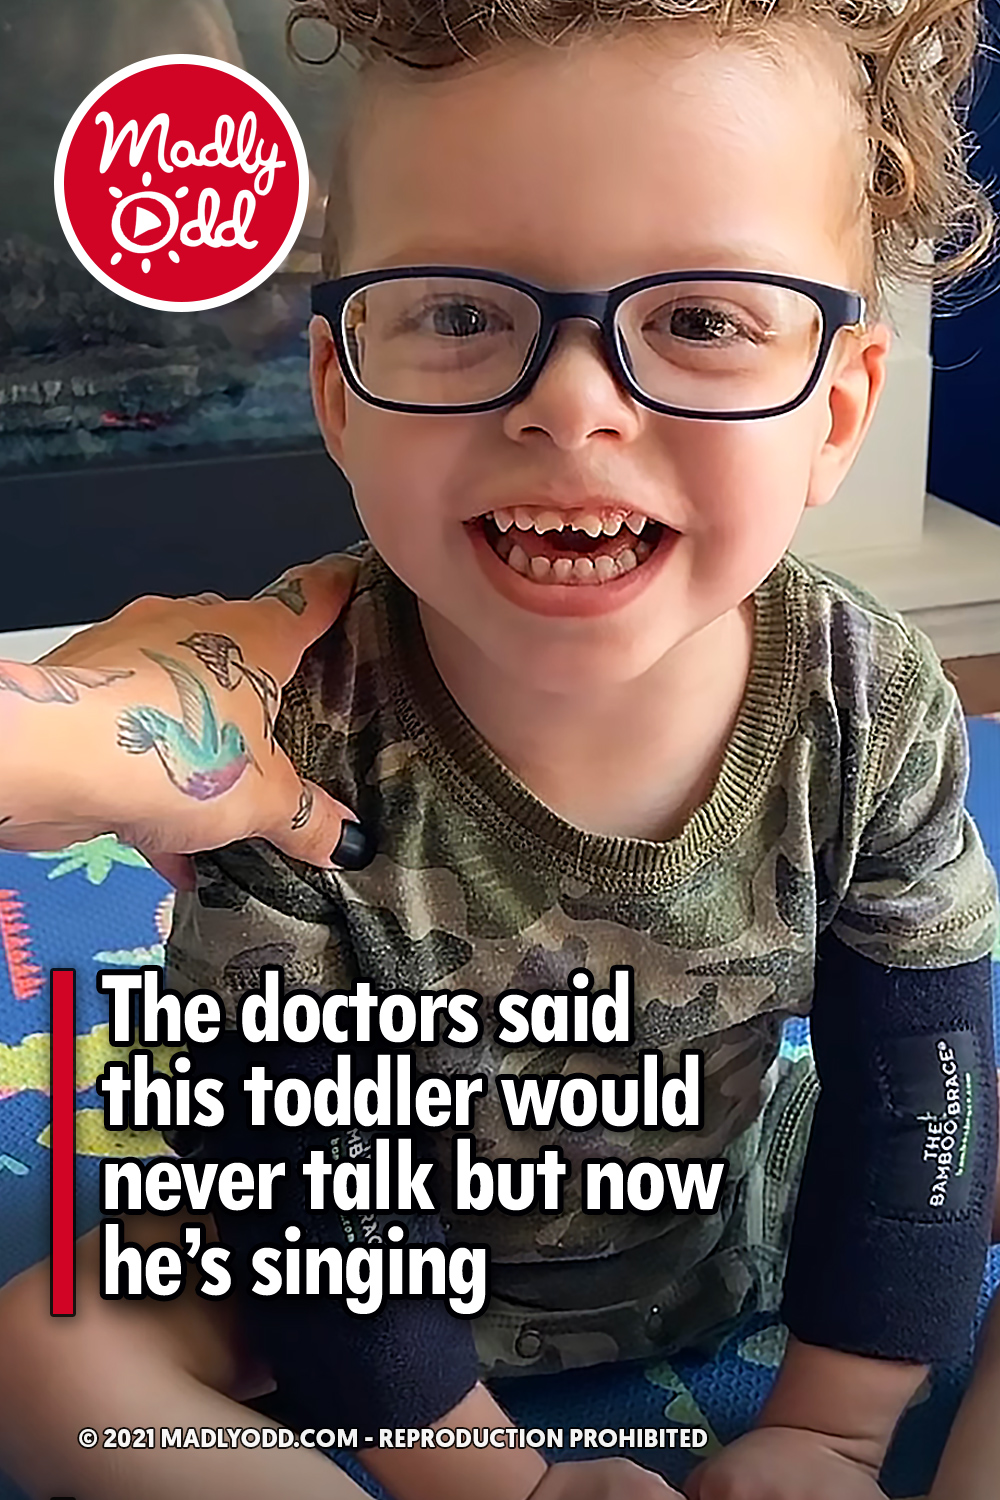 The doctors said this toddler would never talk but now he’s singing